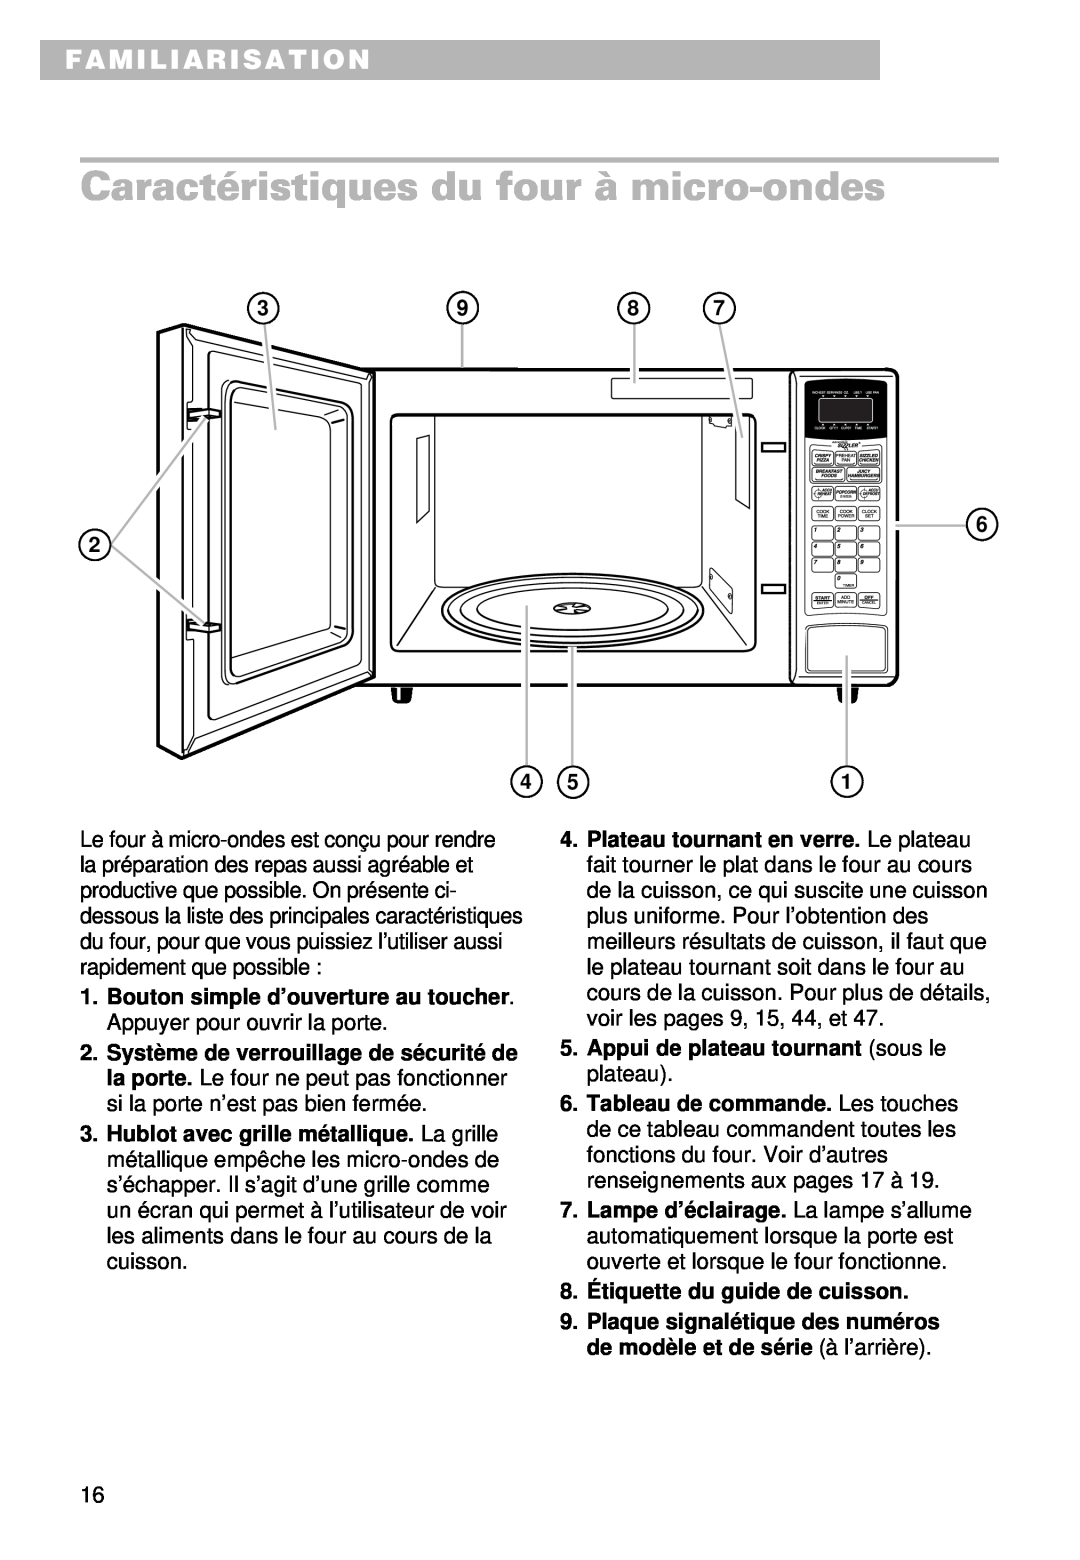 Whirlpool YMT9102SF, YMT9092SF installation instructions Caractéristiques du four à micro-ondes, Familiarisation 